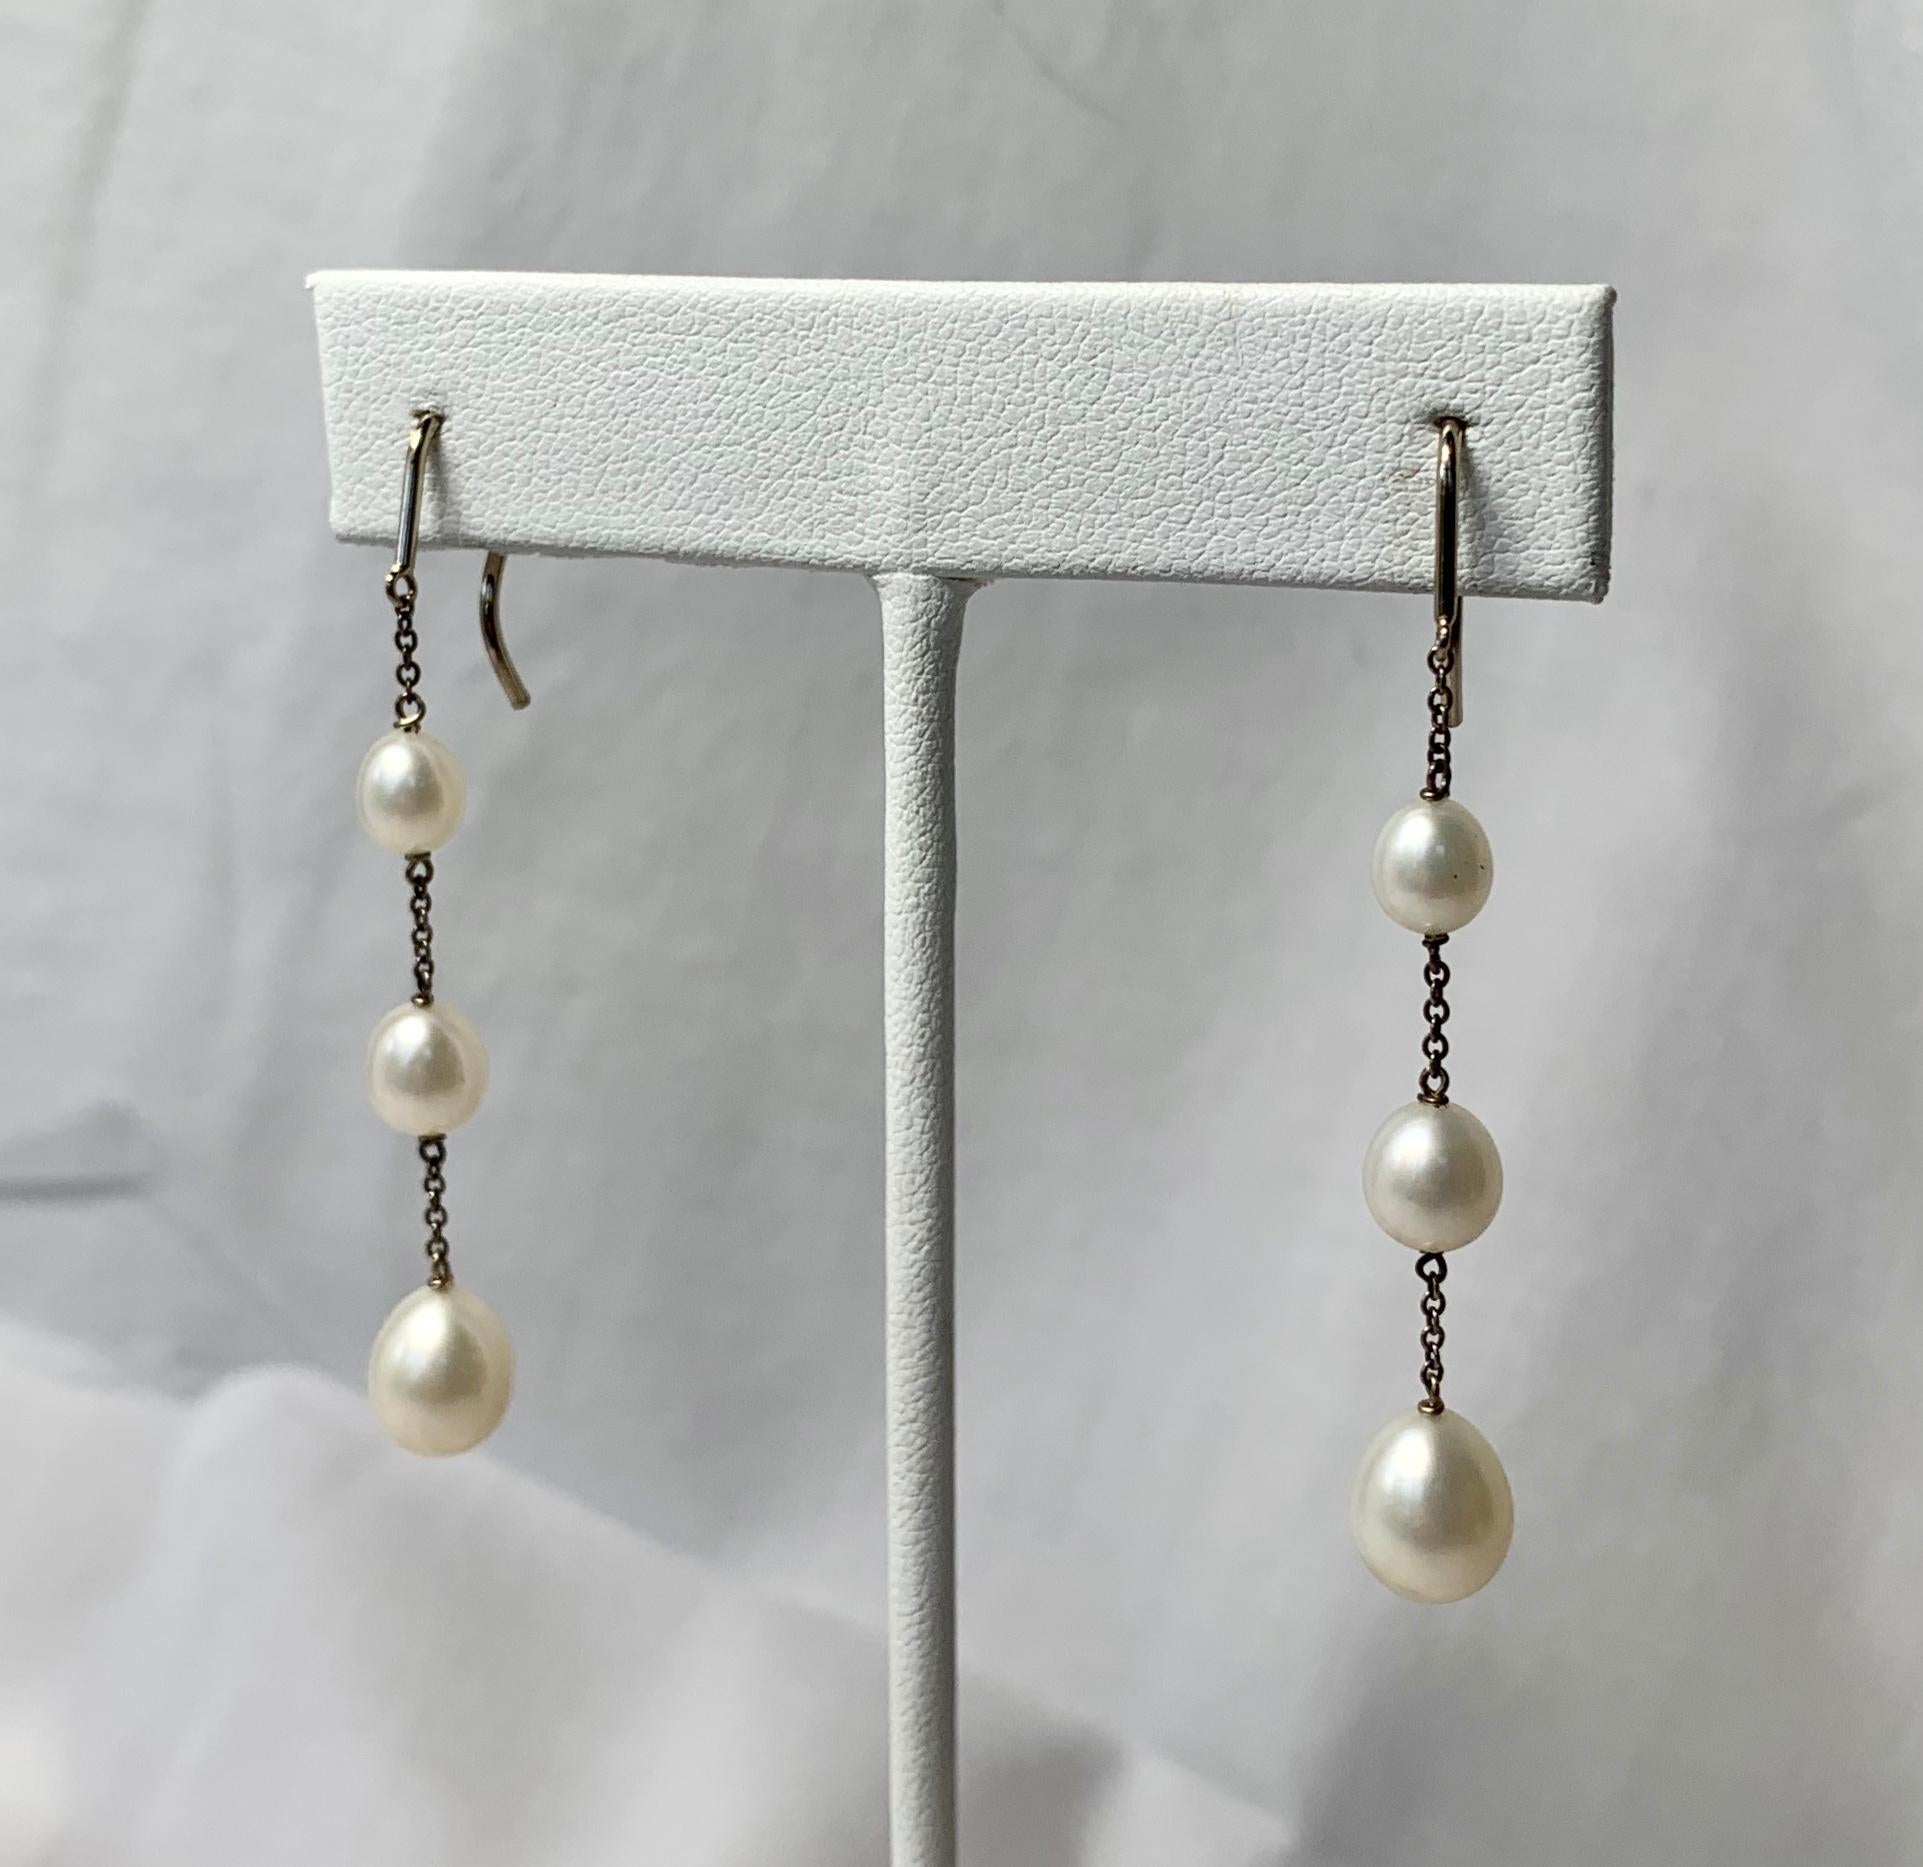 Gorgeous Tiffany & Co. Elsa Peretti Pearls by the Yard Chain Earrings.  Floating on a delicate Sterling Silver chain, Pearls are sleek treasures harboring luminescence in their round profiles.  The earrings are Sterling silver with six freshwater